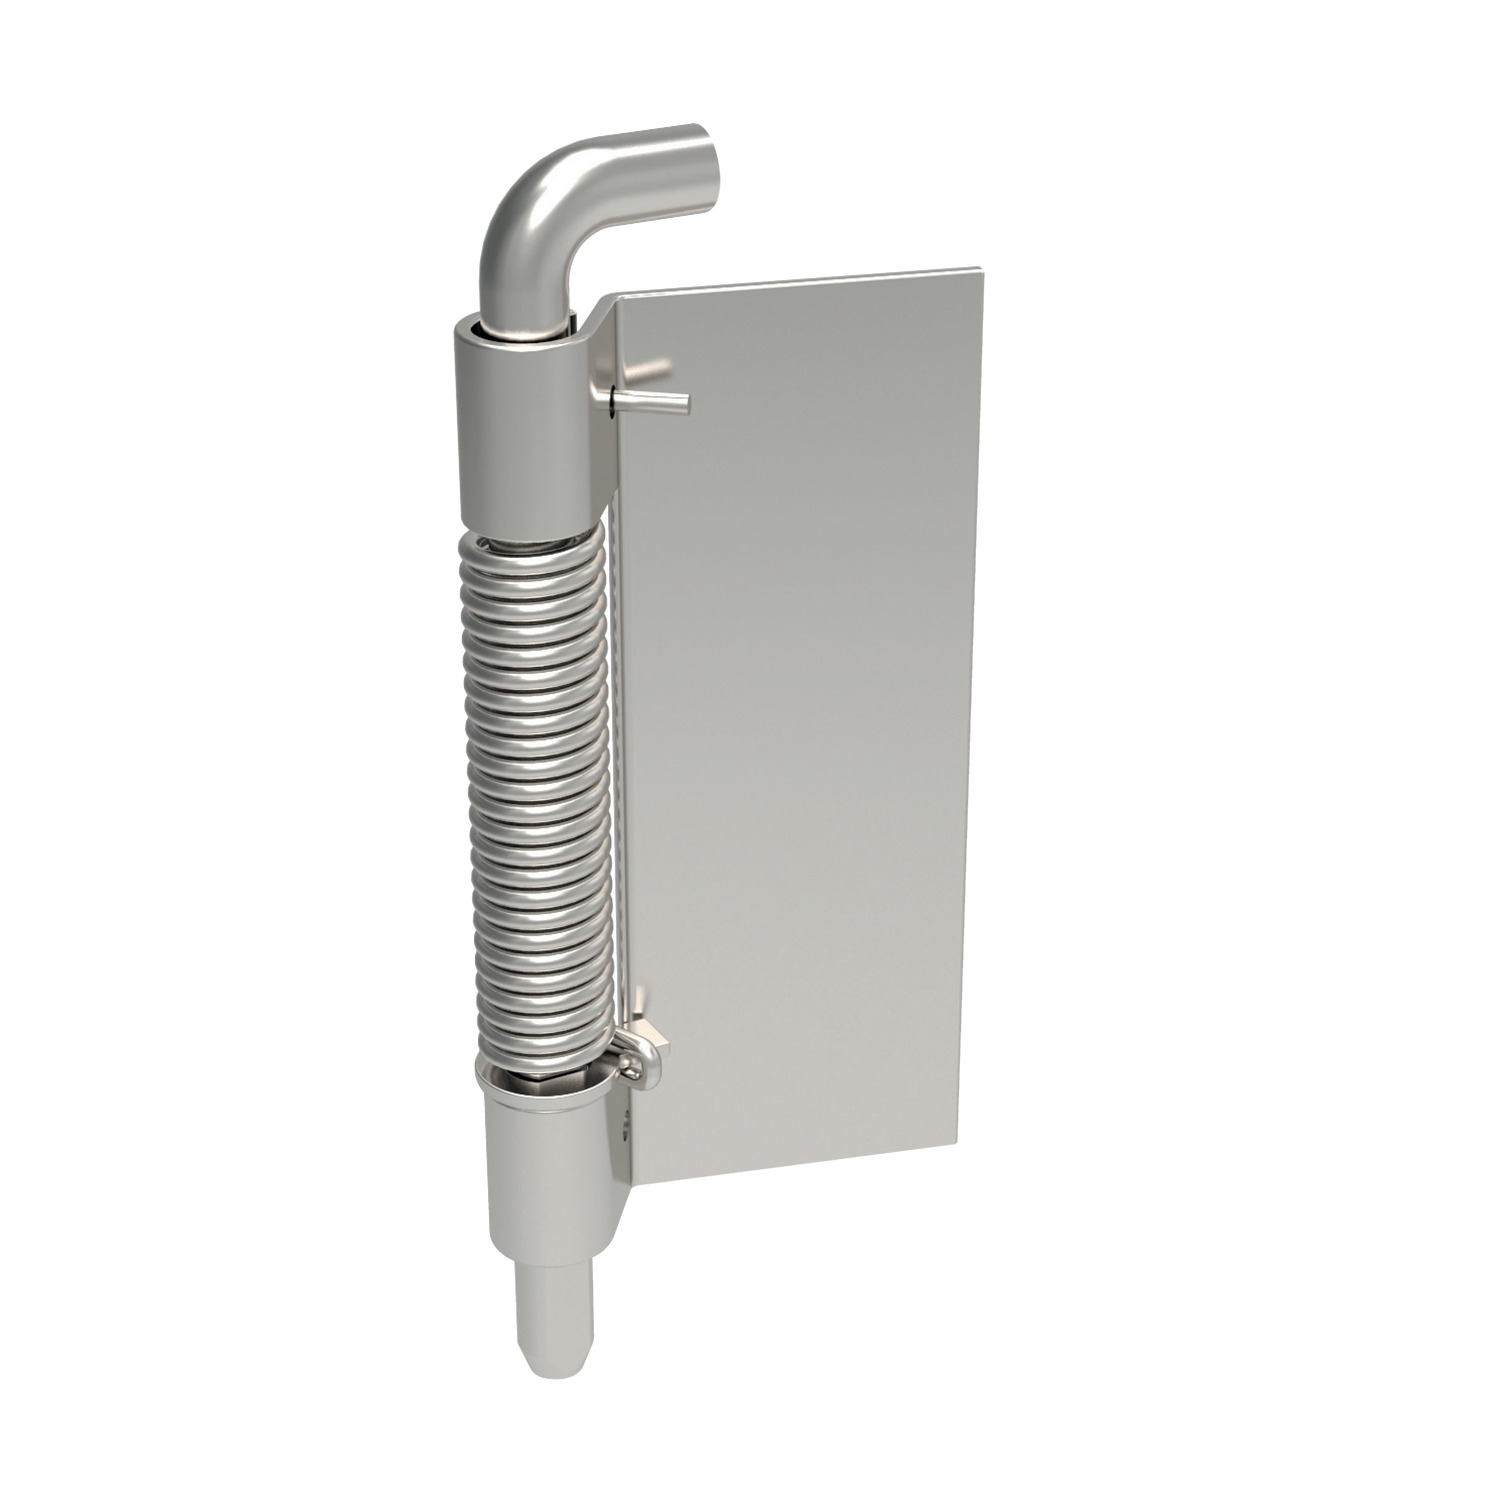 End Mount Concealed Pivot Hinge End-mounted Concealed Pivot Hinges - Weld-on. Made from stainless steel.